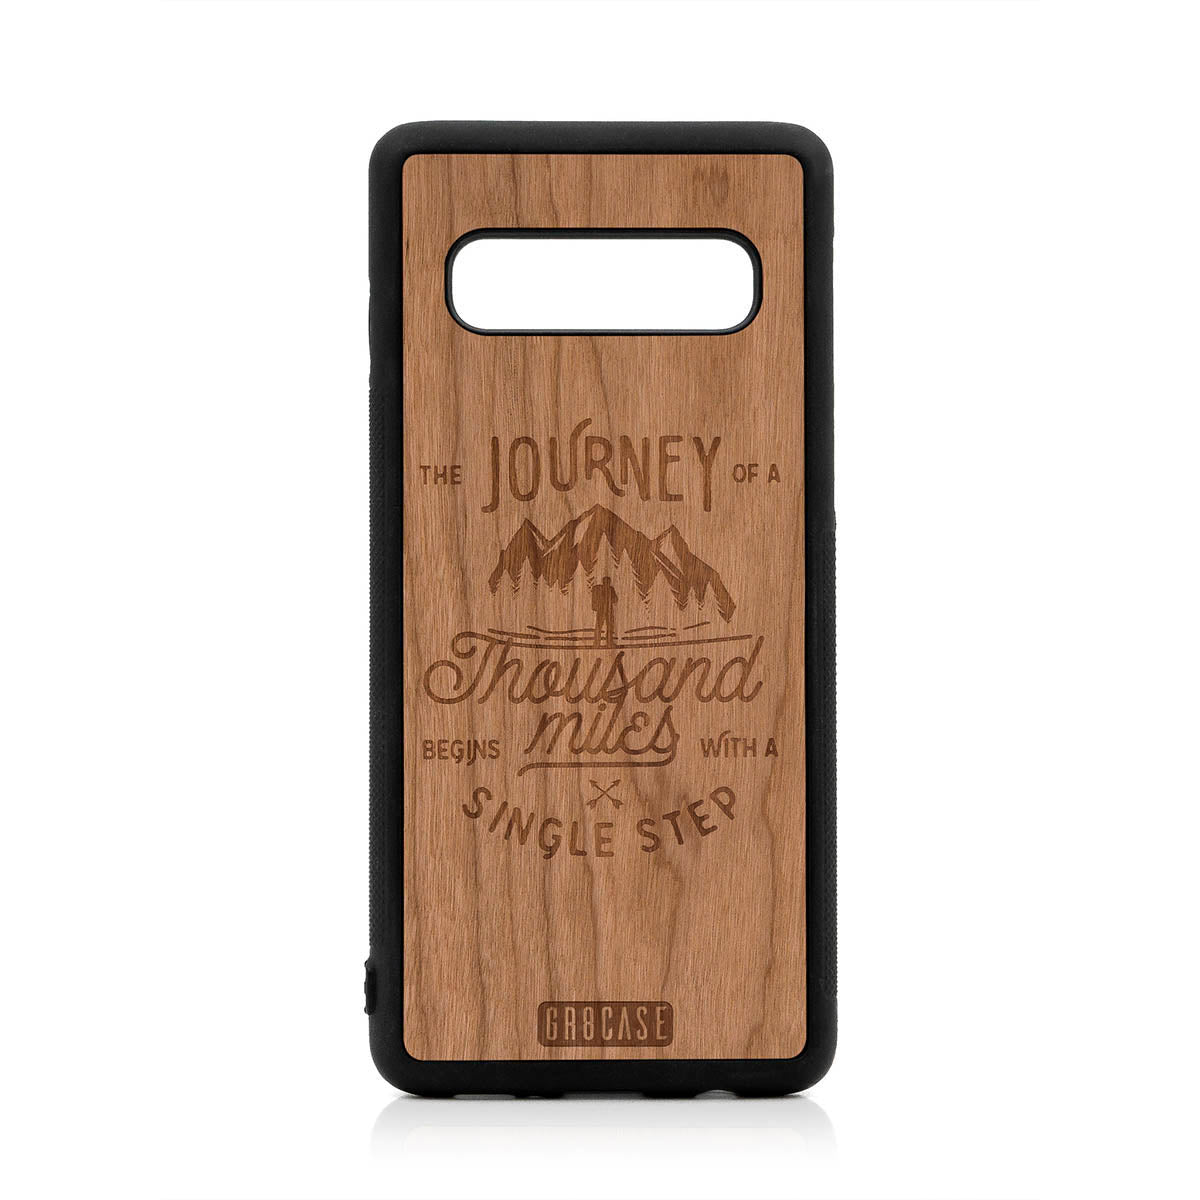 The Journey Of A Thousand Miles Begins With A Single Step Design Wood Case For Samsung Galaxy S10